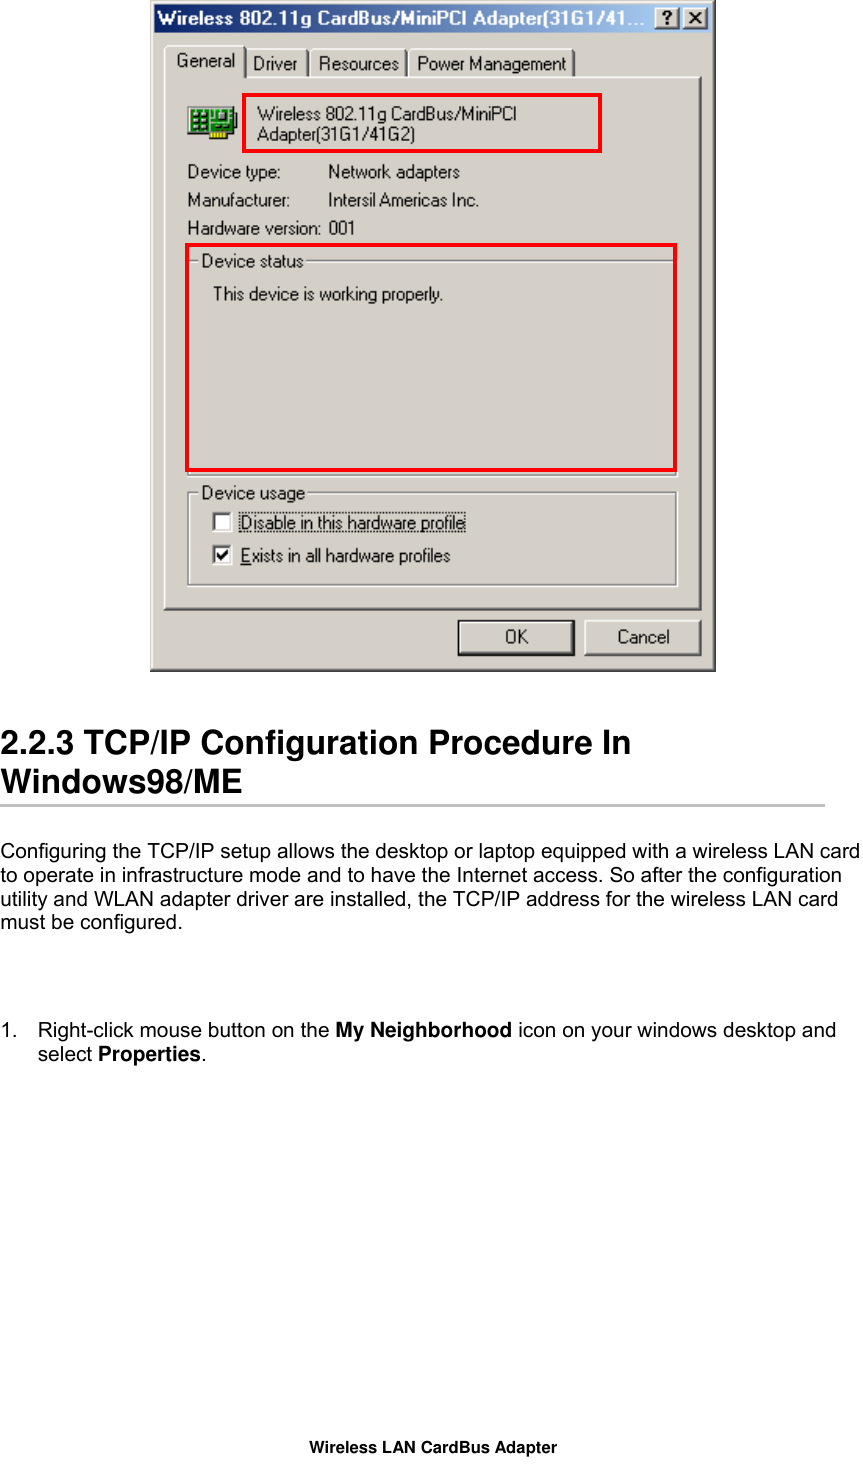    2.2.3 TCP/IP Configuration Procedure In Windows98/ME  Configuring the TCP/IP setup allows the desktop or laptop equipped with a wireless LAN card to operate in infrastructure mode and to have the Internet access. So after the configuration utility and WLAN adapter driver are installed, the TCP/IP address for the wireless LAN card must be configured.   1.  Right-click mouse button on the My Neighborhood icon on your windows desktop and select Properties.  Wireless LAN CardBus Adapter 